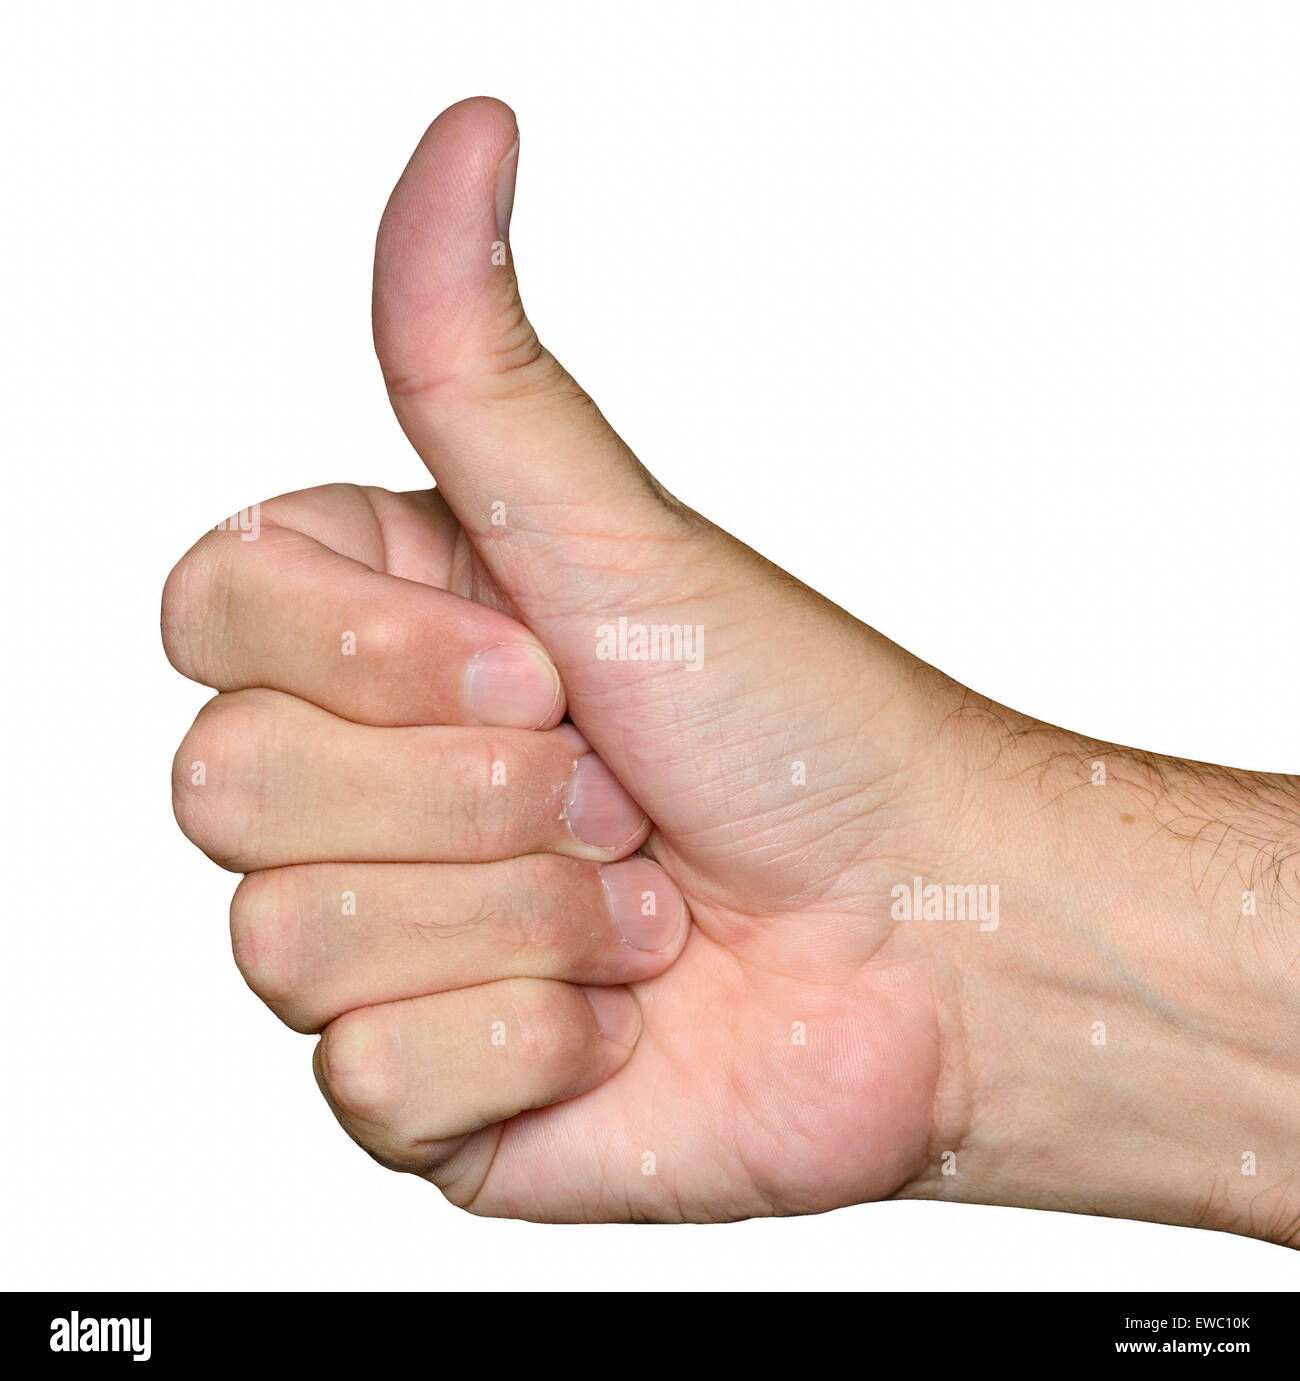 Thumb's up gesture with his hand, on a white background. Stock Photo